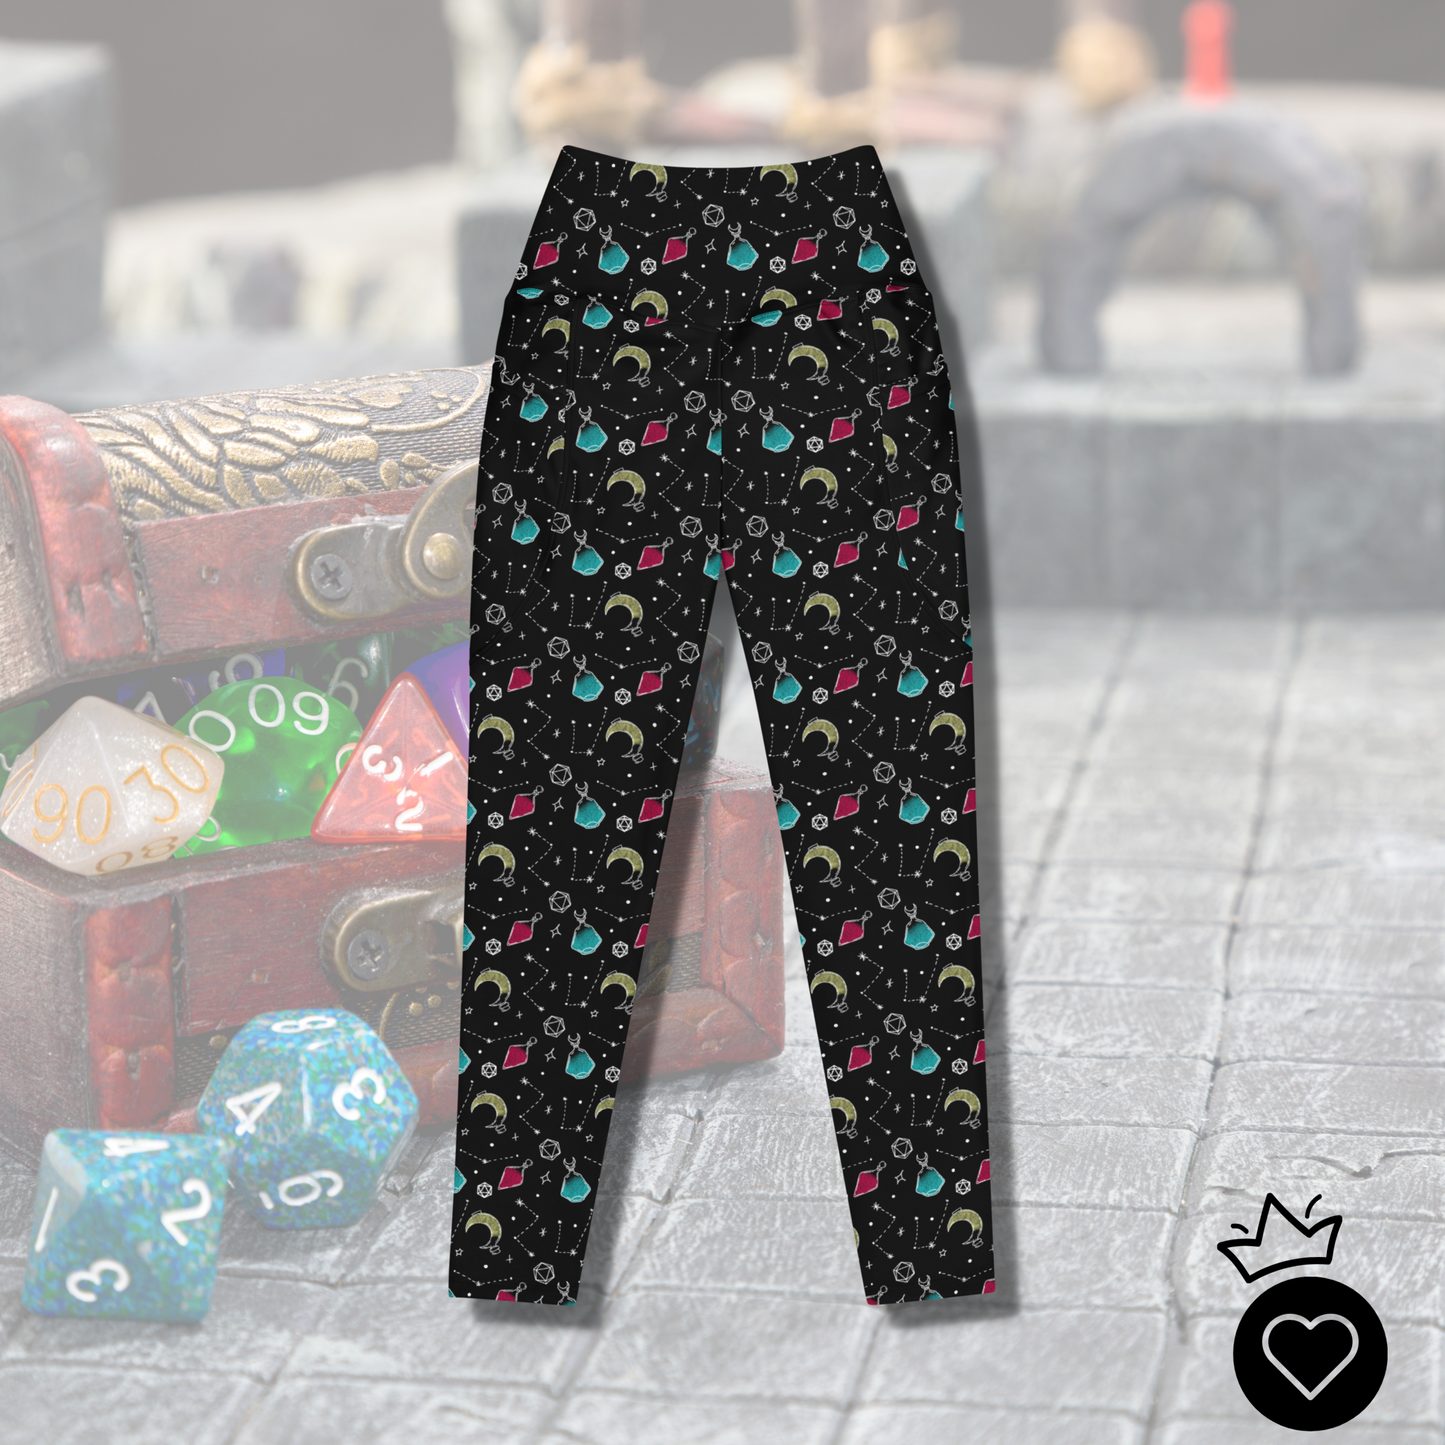 Potions and Dice Leggings Pocket Edition